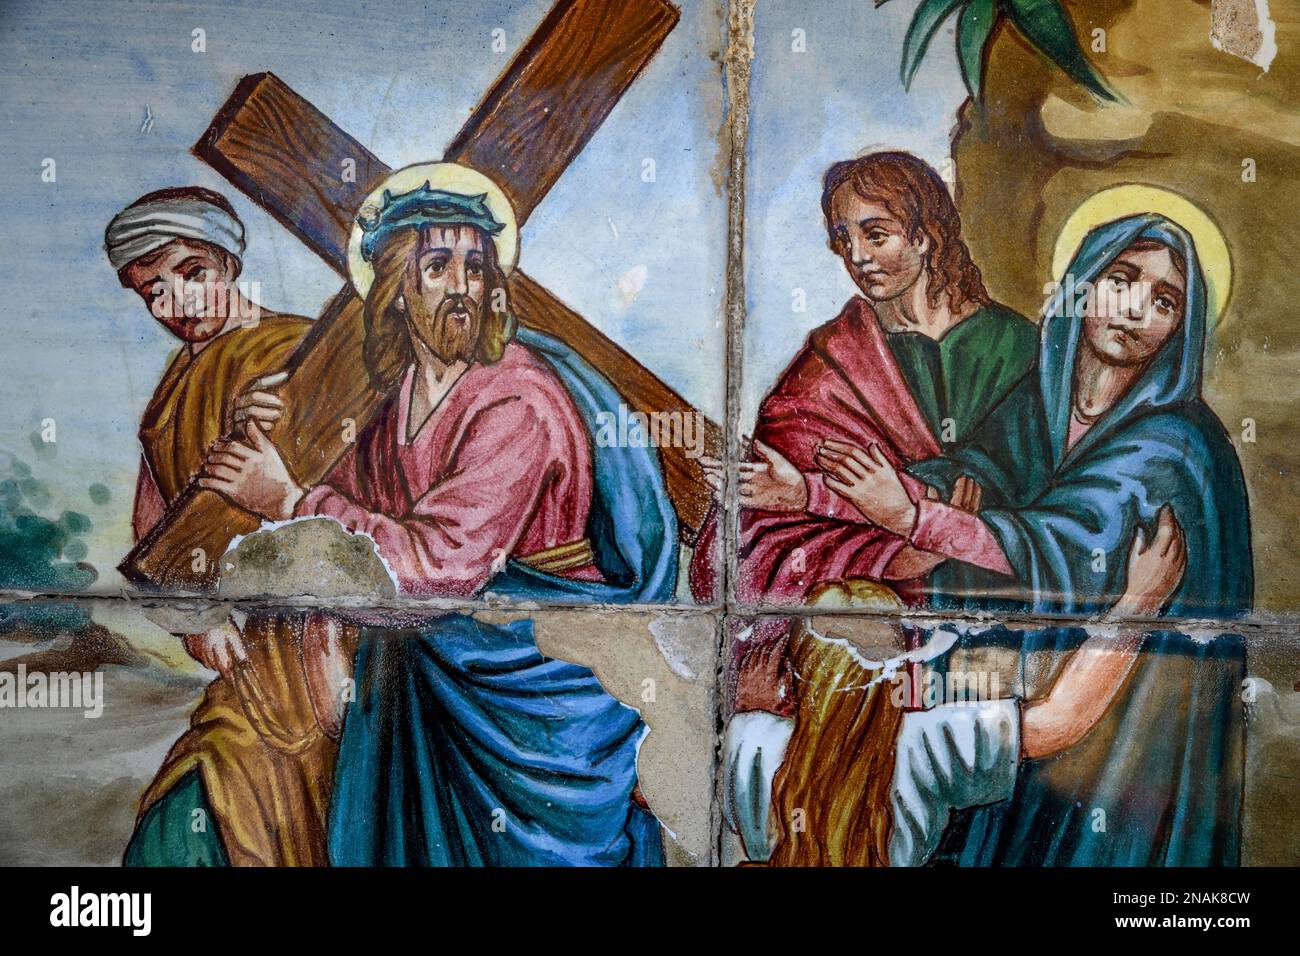 Painted wall tiles of the Passion of Christ at the Way of the Cross in Guadalest, Alicante Province, Costa Blanca, Spain Stock Photo